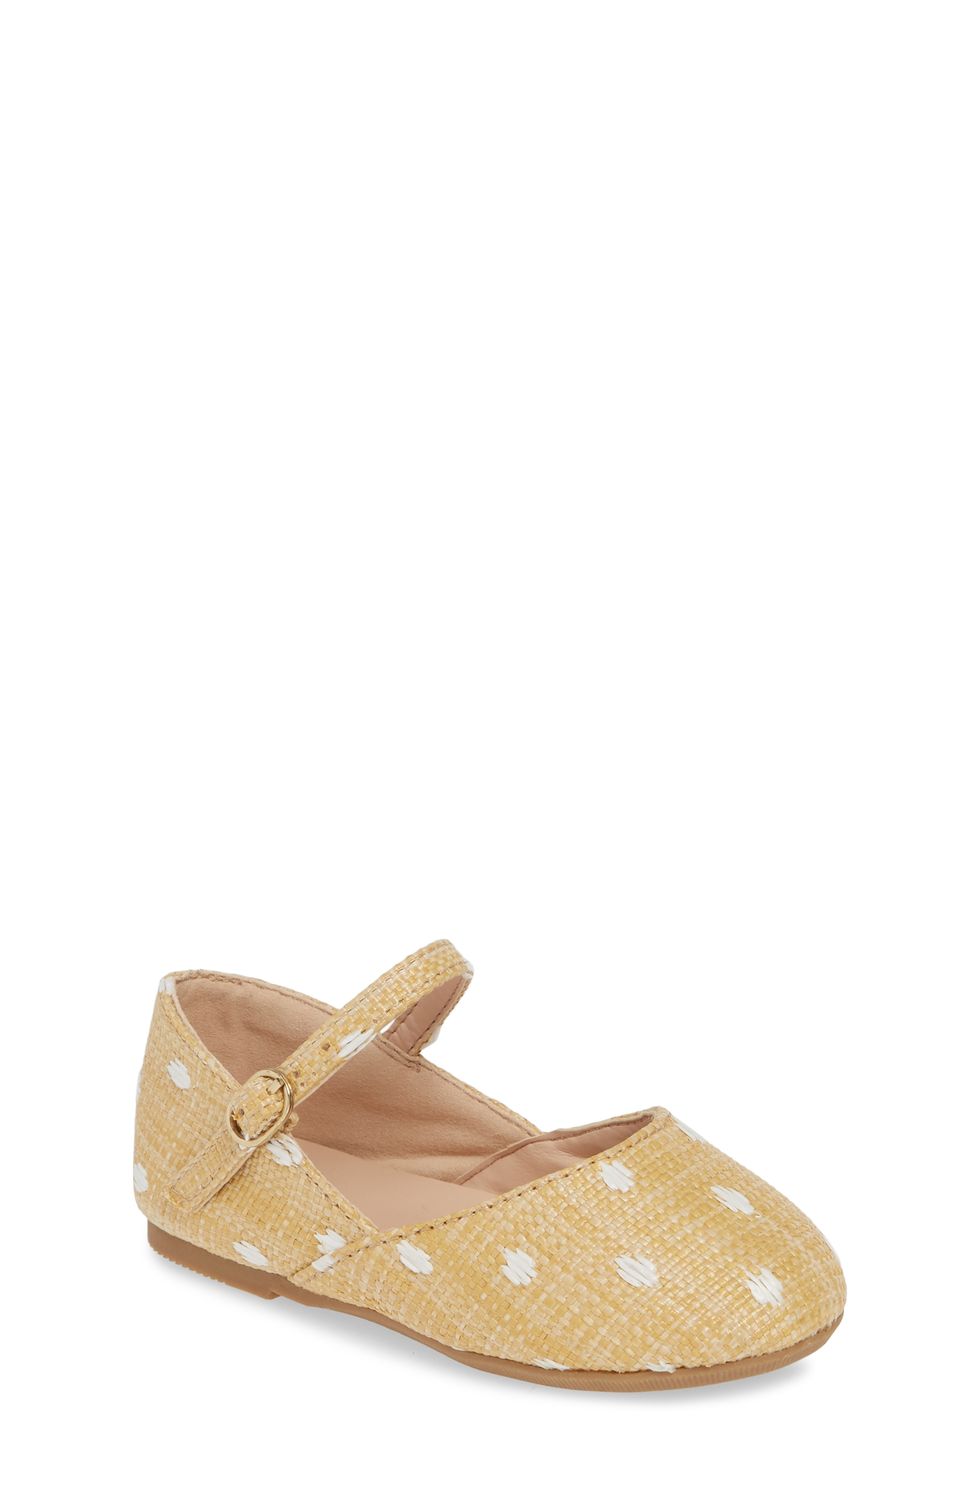 Brighton Raffia Mary Jane Flat in Baby and Toddler Sizes